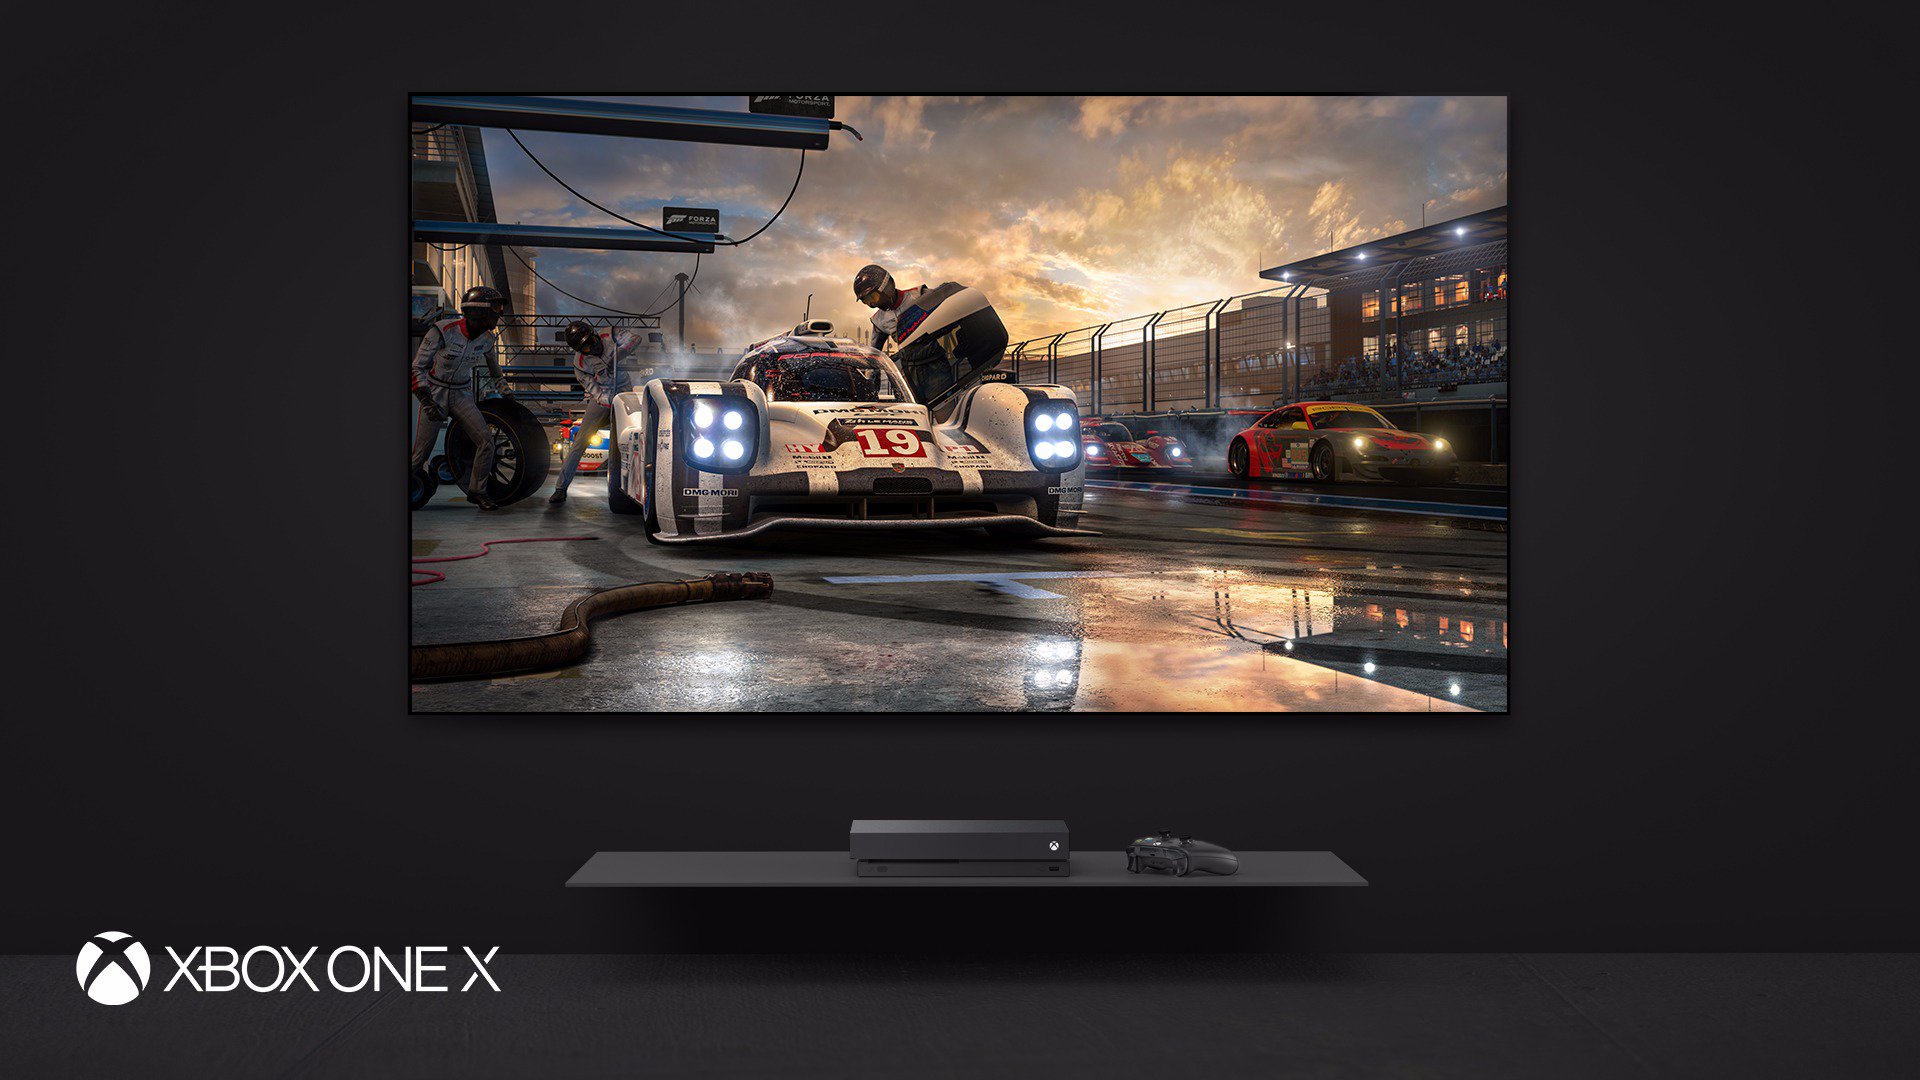 Xbox Twitterren Got A New 4k Tv For Your Xbox One X Or Xbox One S This Handy Guide Will Ensure Your Settings Are On Point For 4k And Hdr Gaming T Co Mbedhw3vxp T Co 8epepsqz0p